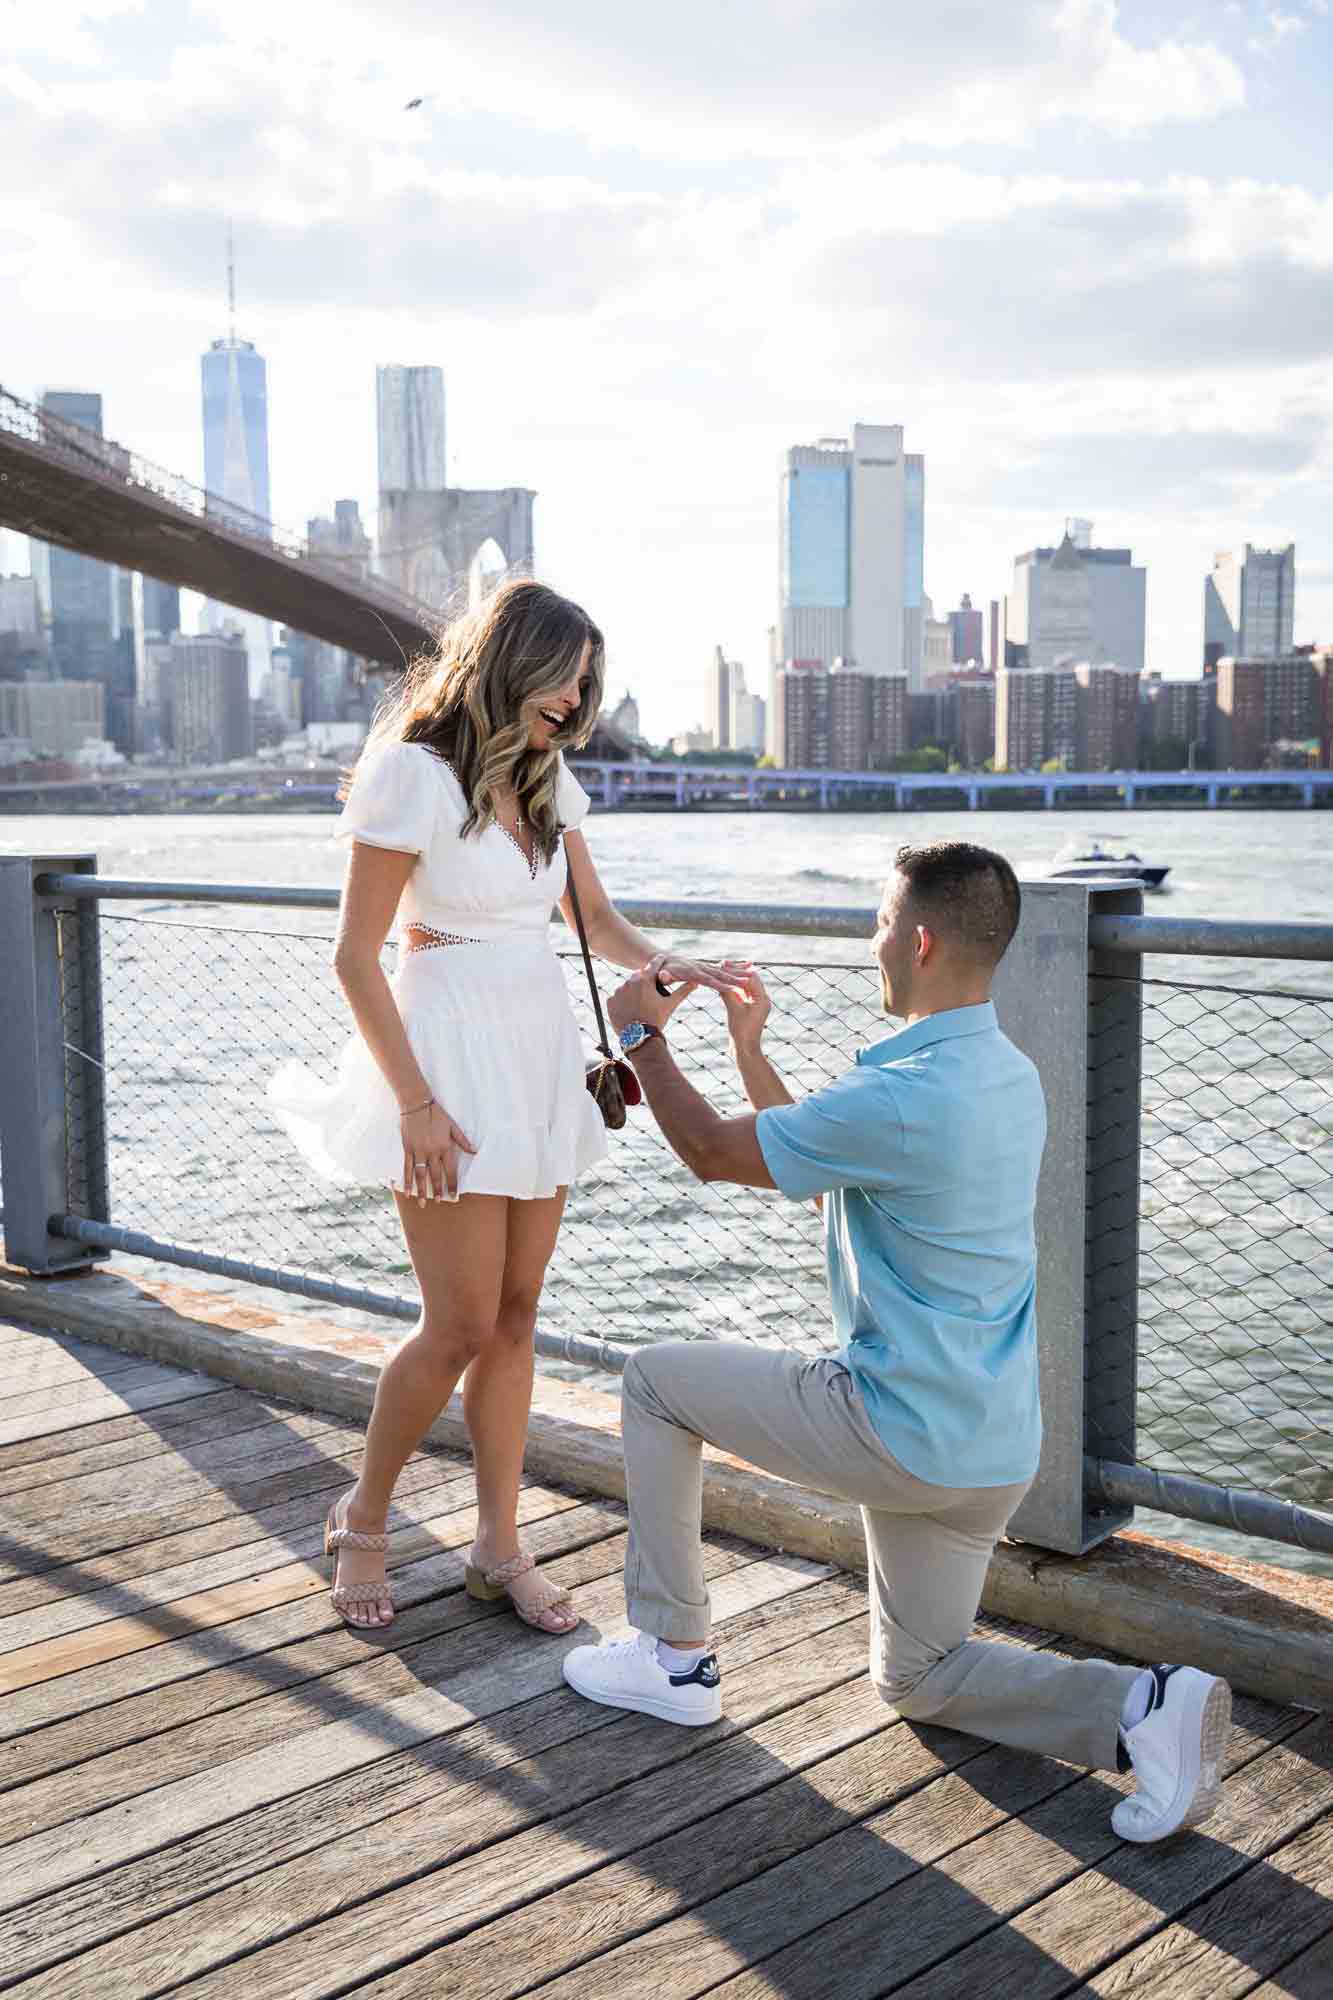 Man on bended knee putting ring on woman's finger during a Brooklyn Bridge Park surprise proposal